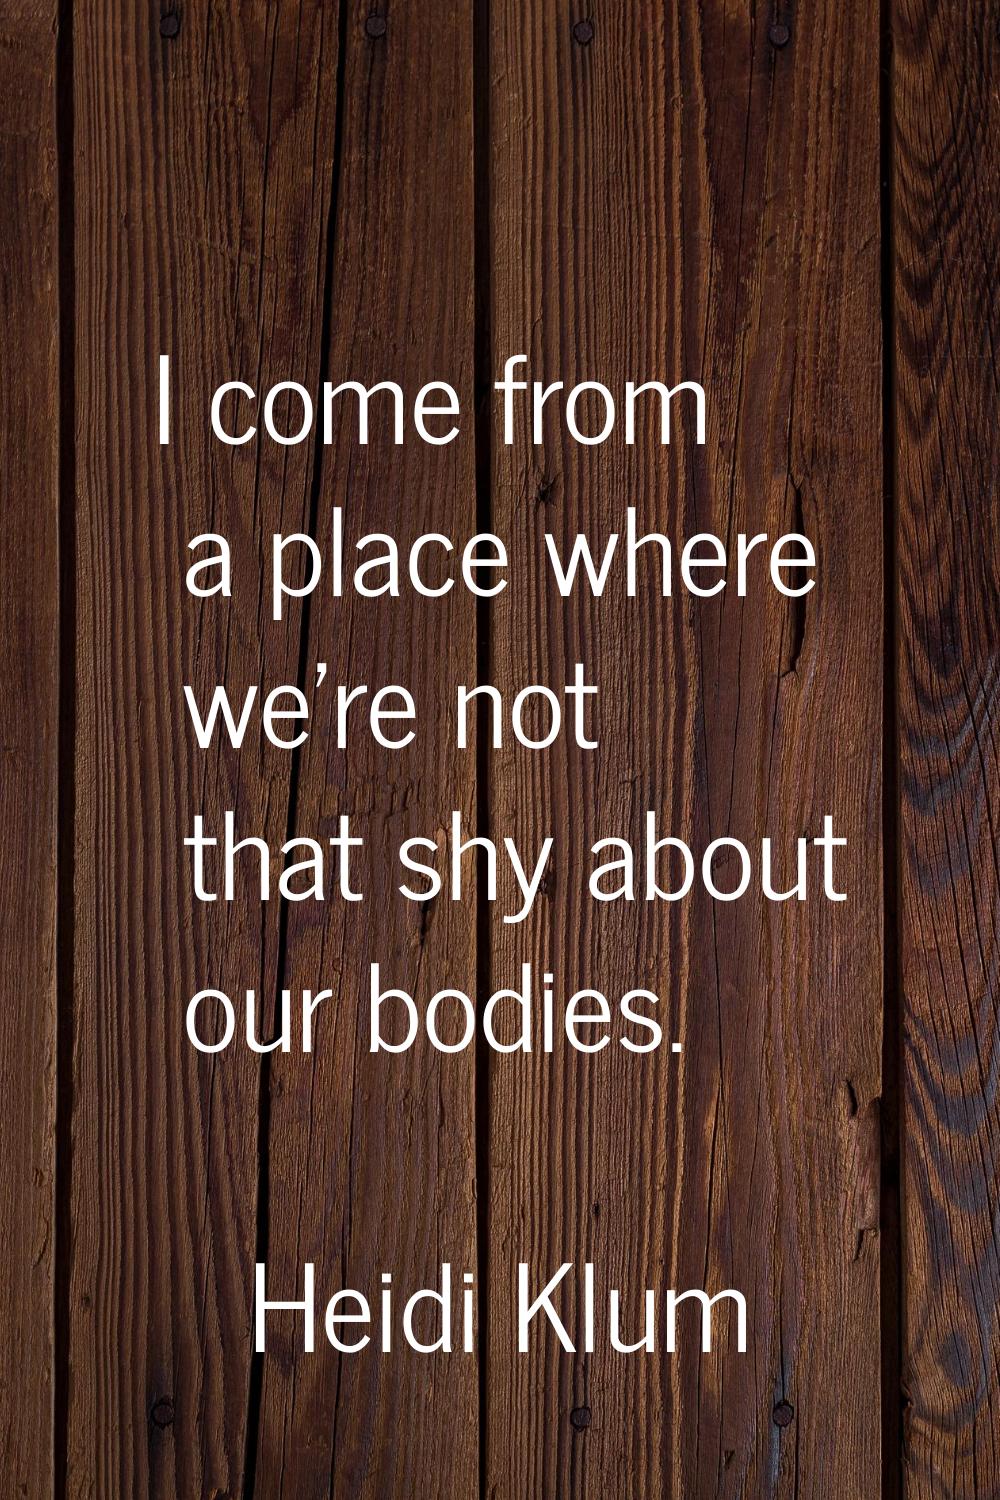 I come from a place where we're not that shy about our bodies.